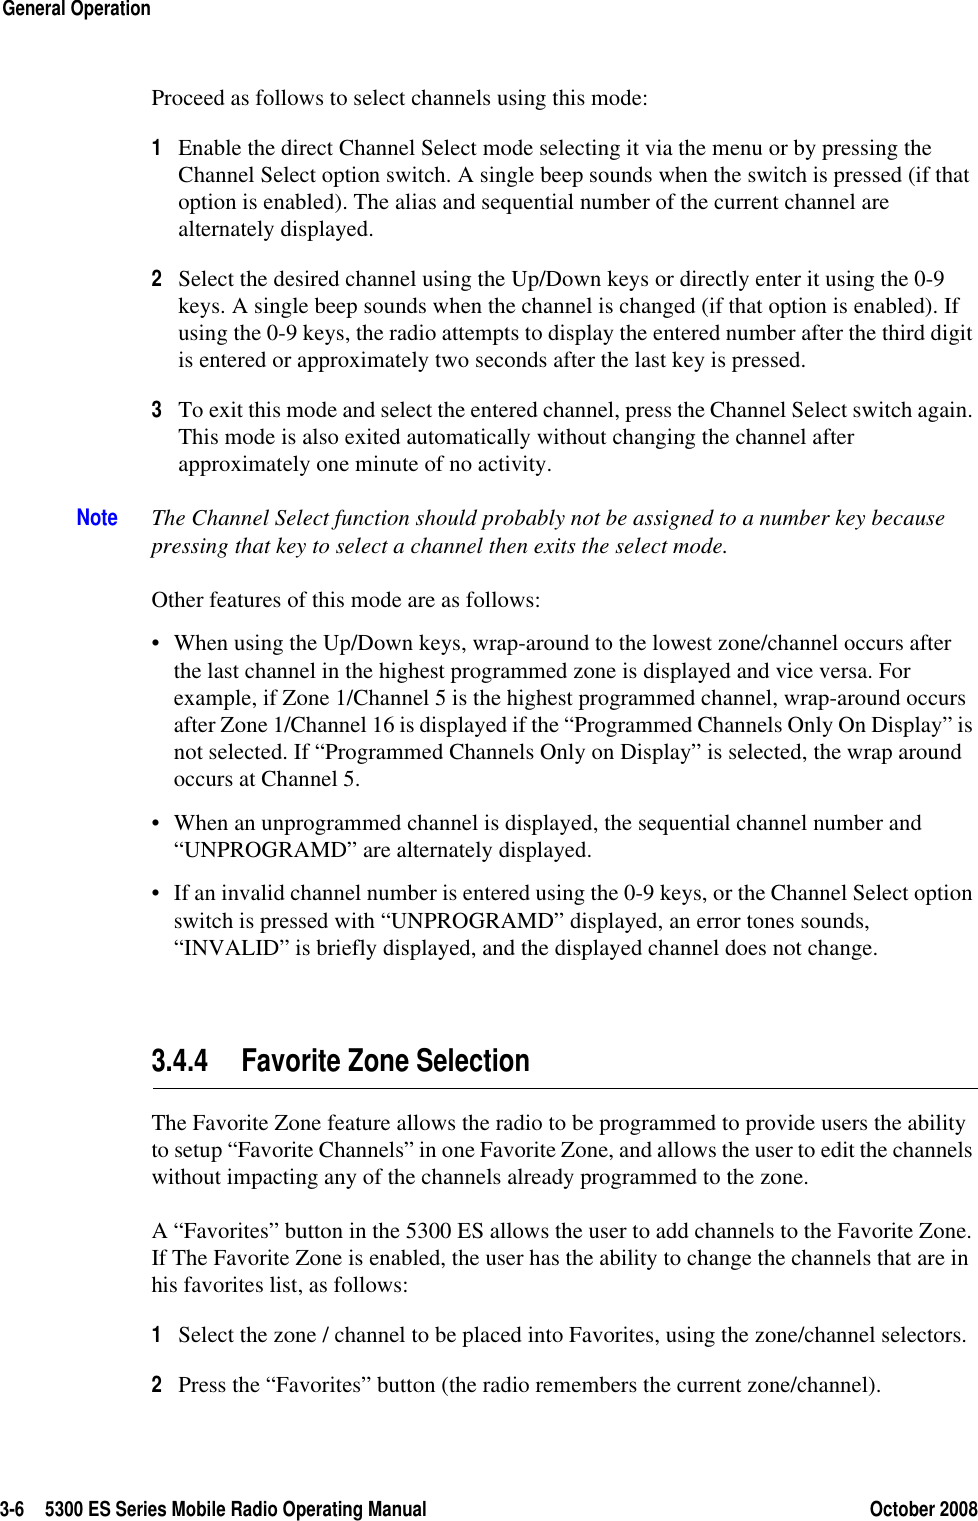 3-6 5300 ES Series Mobile Radio Operating Manual October 2008General OperationProceed as follows to select channels using this mode:1Enable the direct Channel Select mode selecting it via the menu or by pressing the Channel Select option switch. A single beep sounds when the switch is pressed (if that option is enabled). The alias and sequential number of the current channel are alternately displayed.2Select the desired channel using the Up/Down keys or directly enter it using the 0-9 keys. A single beep sounds when the channel is changed (if that option is enabled). If using the 0-9 keys, the radio attempts to display the entered number after the third digit is entered or approximately two seconds after the last key is pressed. 3To exit this mode and select the entered channel, press the Channel Select switch again. This mode is also exited automatically without changing the channel after approximately one minute of no activity.Note The Channel Select function should probably not be assigned to a number key because pressing that key to select a channel then exits the select mode. Other features of this mode are as follows:• When using the Up/Down keys, wrap-around to the lowest zone/channel occurs after the last channel in the highest programmed zone is displayed and vice versa. For example, if Zone 1/Channel 5 is the highest programmed channel, wrap-around occurs after Zone 1/Channel 16 is displayed if the “Programmed Channels Only On Display” is not selected. If “Programmed Channels Only on Display” is selected, the wrap around occurs at Channel 5.• When an unprogrammed channel is displayed, the sequential channel number and “UNPROGRAMD” are alternately displayed. • If an invalid channel number is entered using the 0-9 keys, or the Channel Select option switch is pressed with “UNPROGRAMD” displayed, an error tones sounds, “INVALID” is briefly displayed, and the displayed channel does not change.3.4.4 Favorite Zone SelectionThe Favorite Zone feature allows the radio to be programmed to provide users the ability to setup “Favorite Channels” in one Favorite Zone, and allows the user to edit the channels without impacting any of the channels already programmed to the zone.A “Favorites” button in the 5300 ES allows the user to add channels to the Favorite Zone. If The Favorite Zone is enabled, the user has the ability to change the channels that are in his favorites list, as follows: 1Select the zone / channel to be placed into Favorites, using the zone/channel selectors.2Press the “Favorites” button (the radio remembers the current zone/channel).